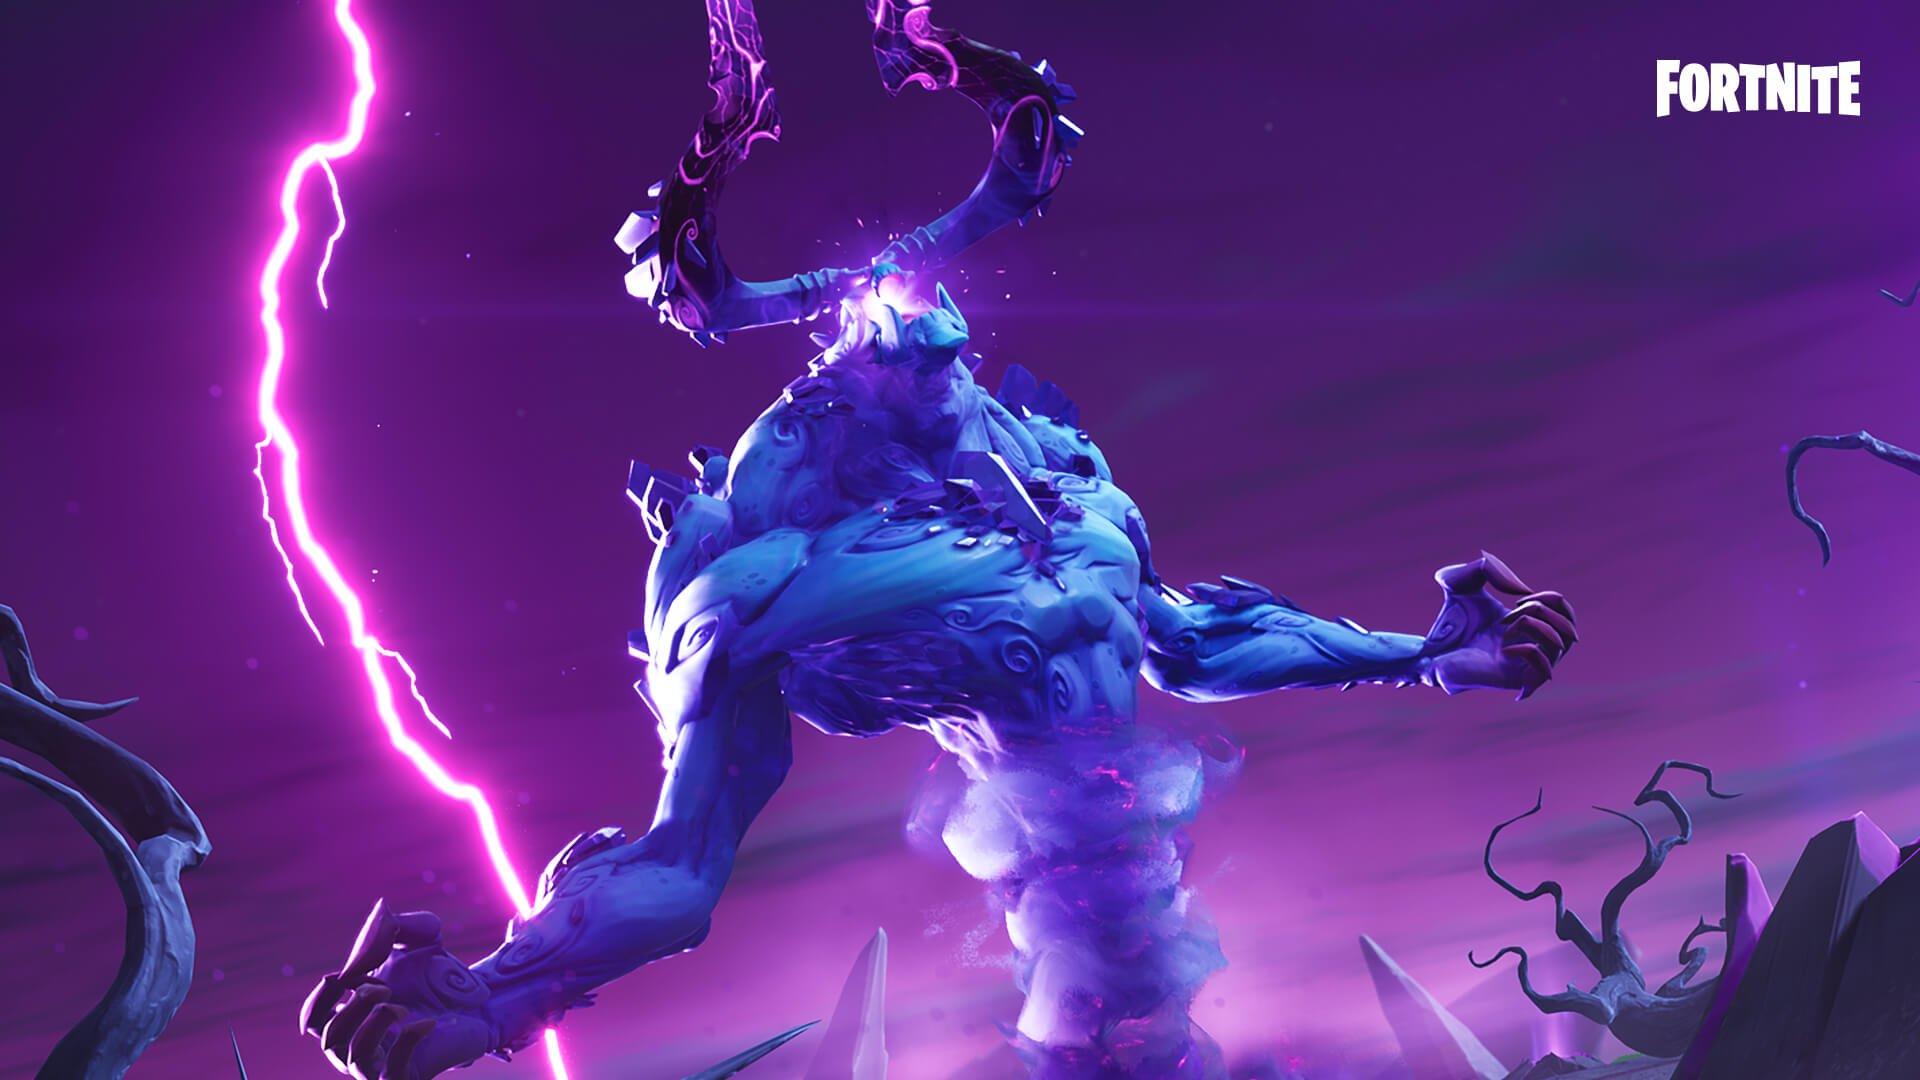 It's now easier to defeat the Fortnite Storm King after Epic Games